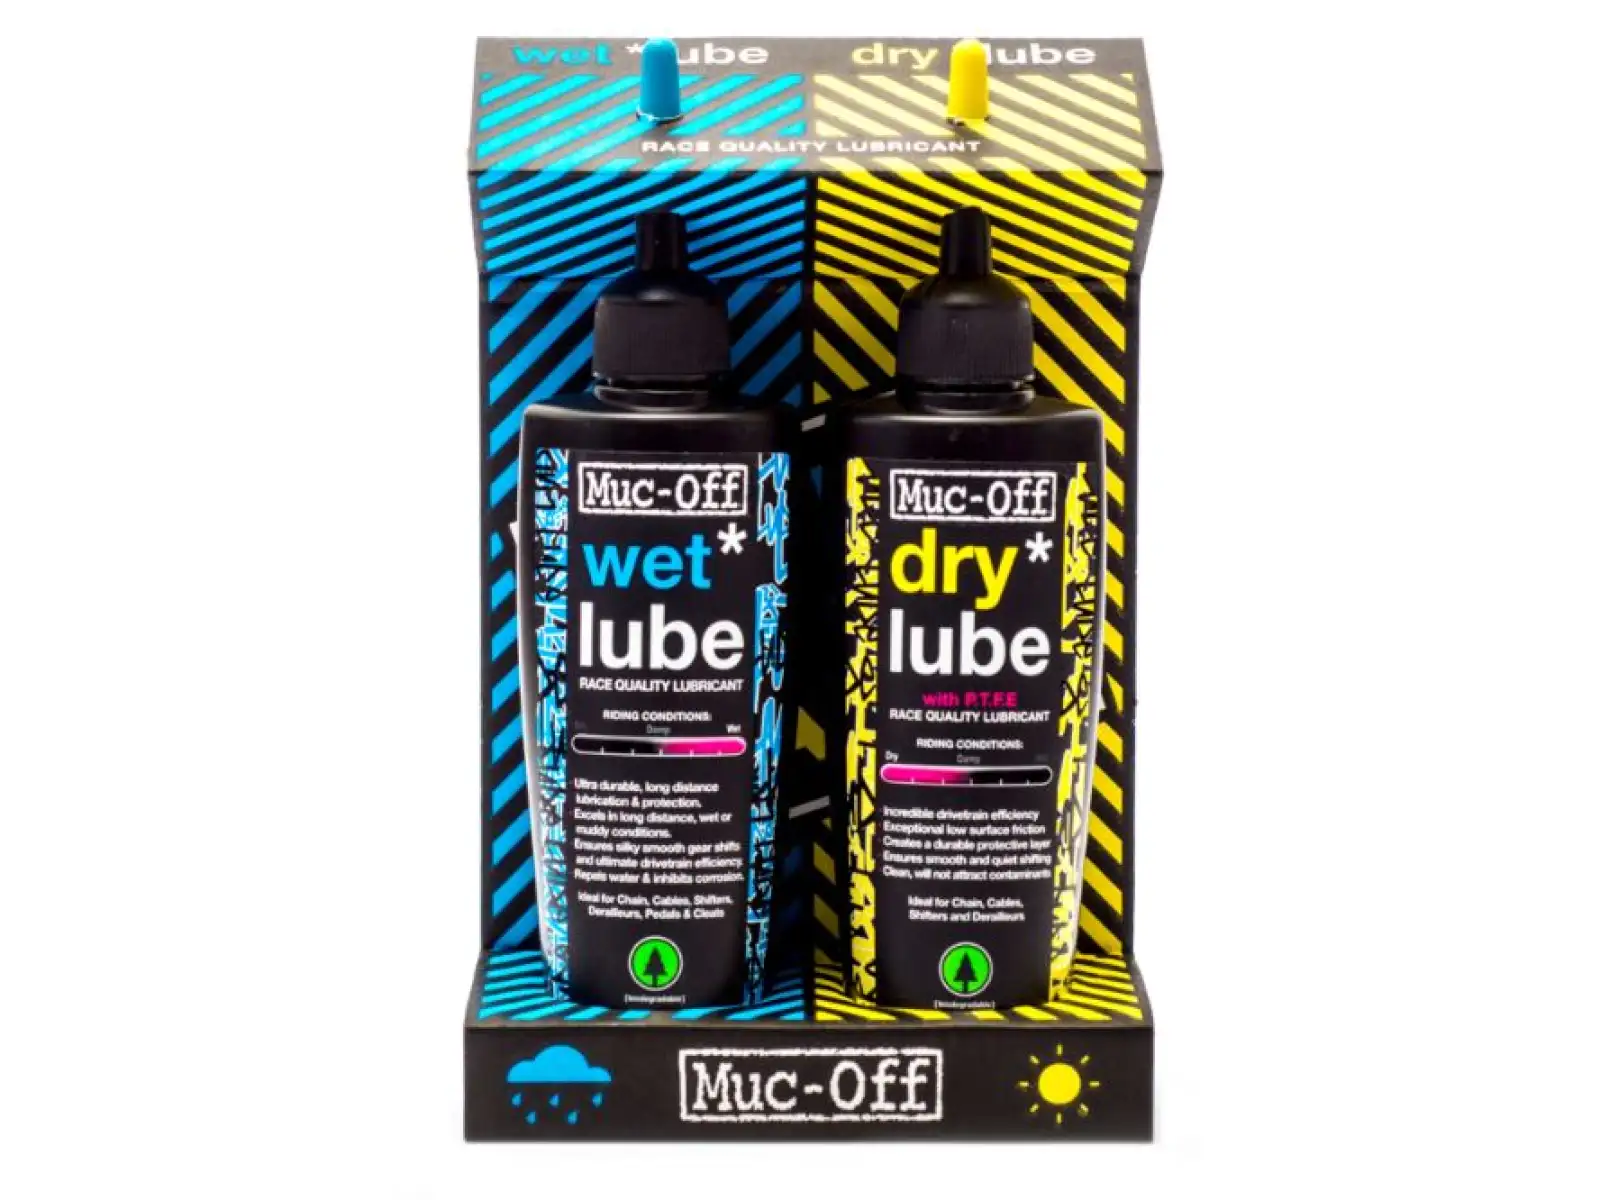 Muc-Off Wet + Dry lube Twin Pack 2 x 120ml